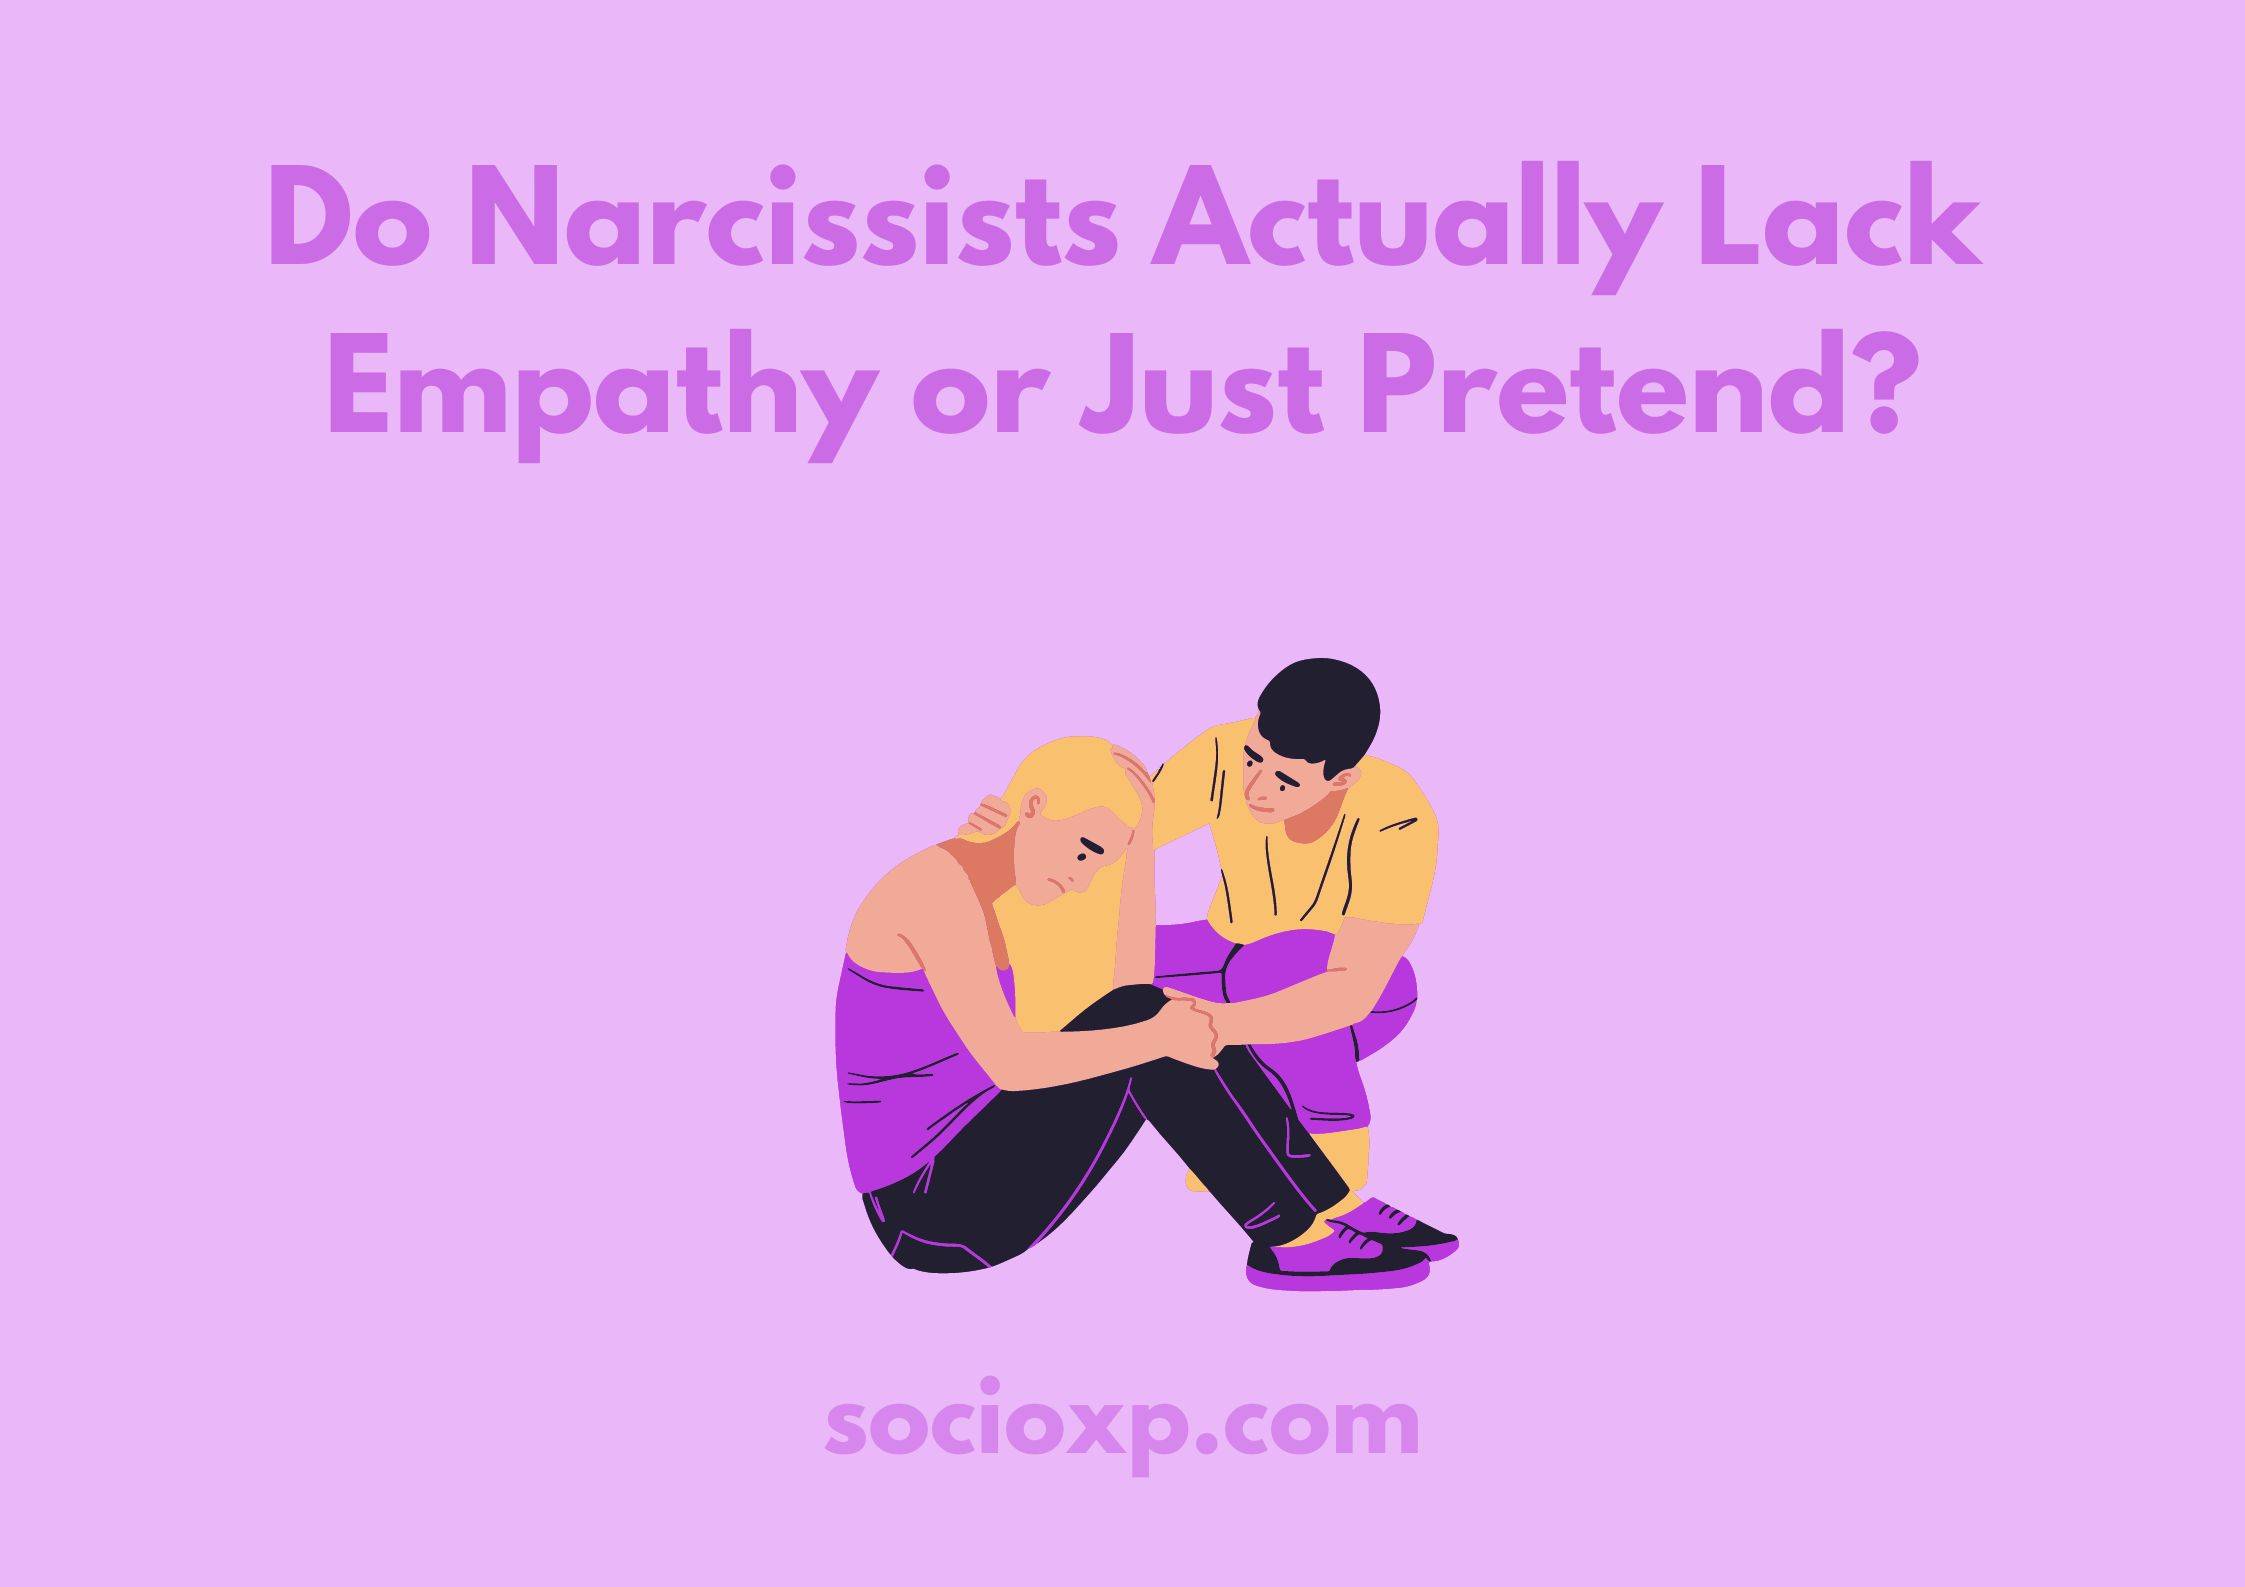 Do Narcissists Actually Lack Empathy or Just Pretend?